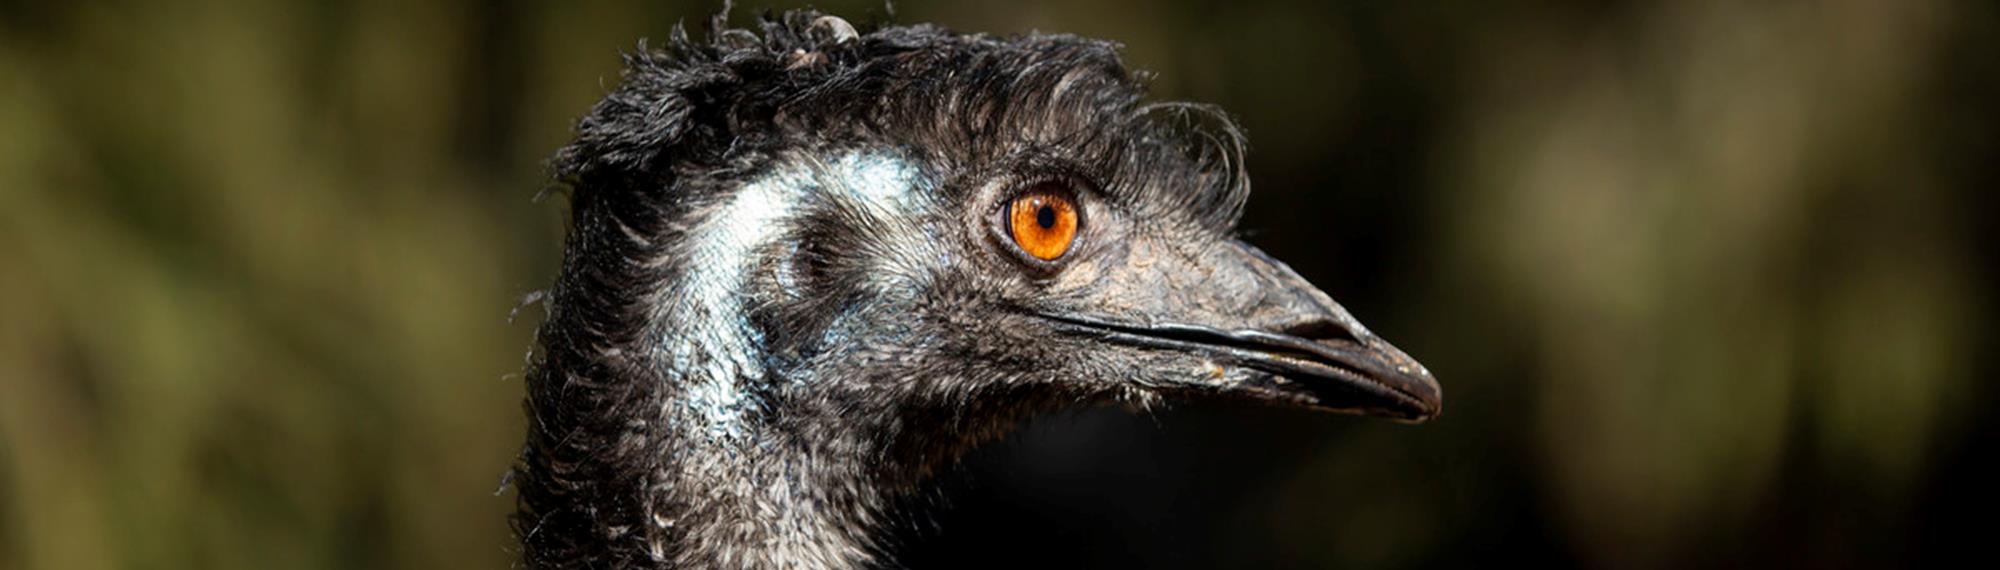 Close up profile of an emu head. The emu is facing to the right and has an orange eye.